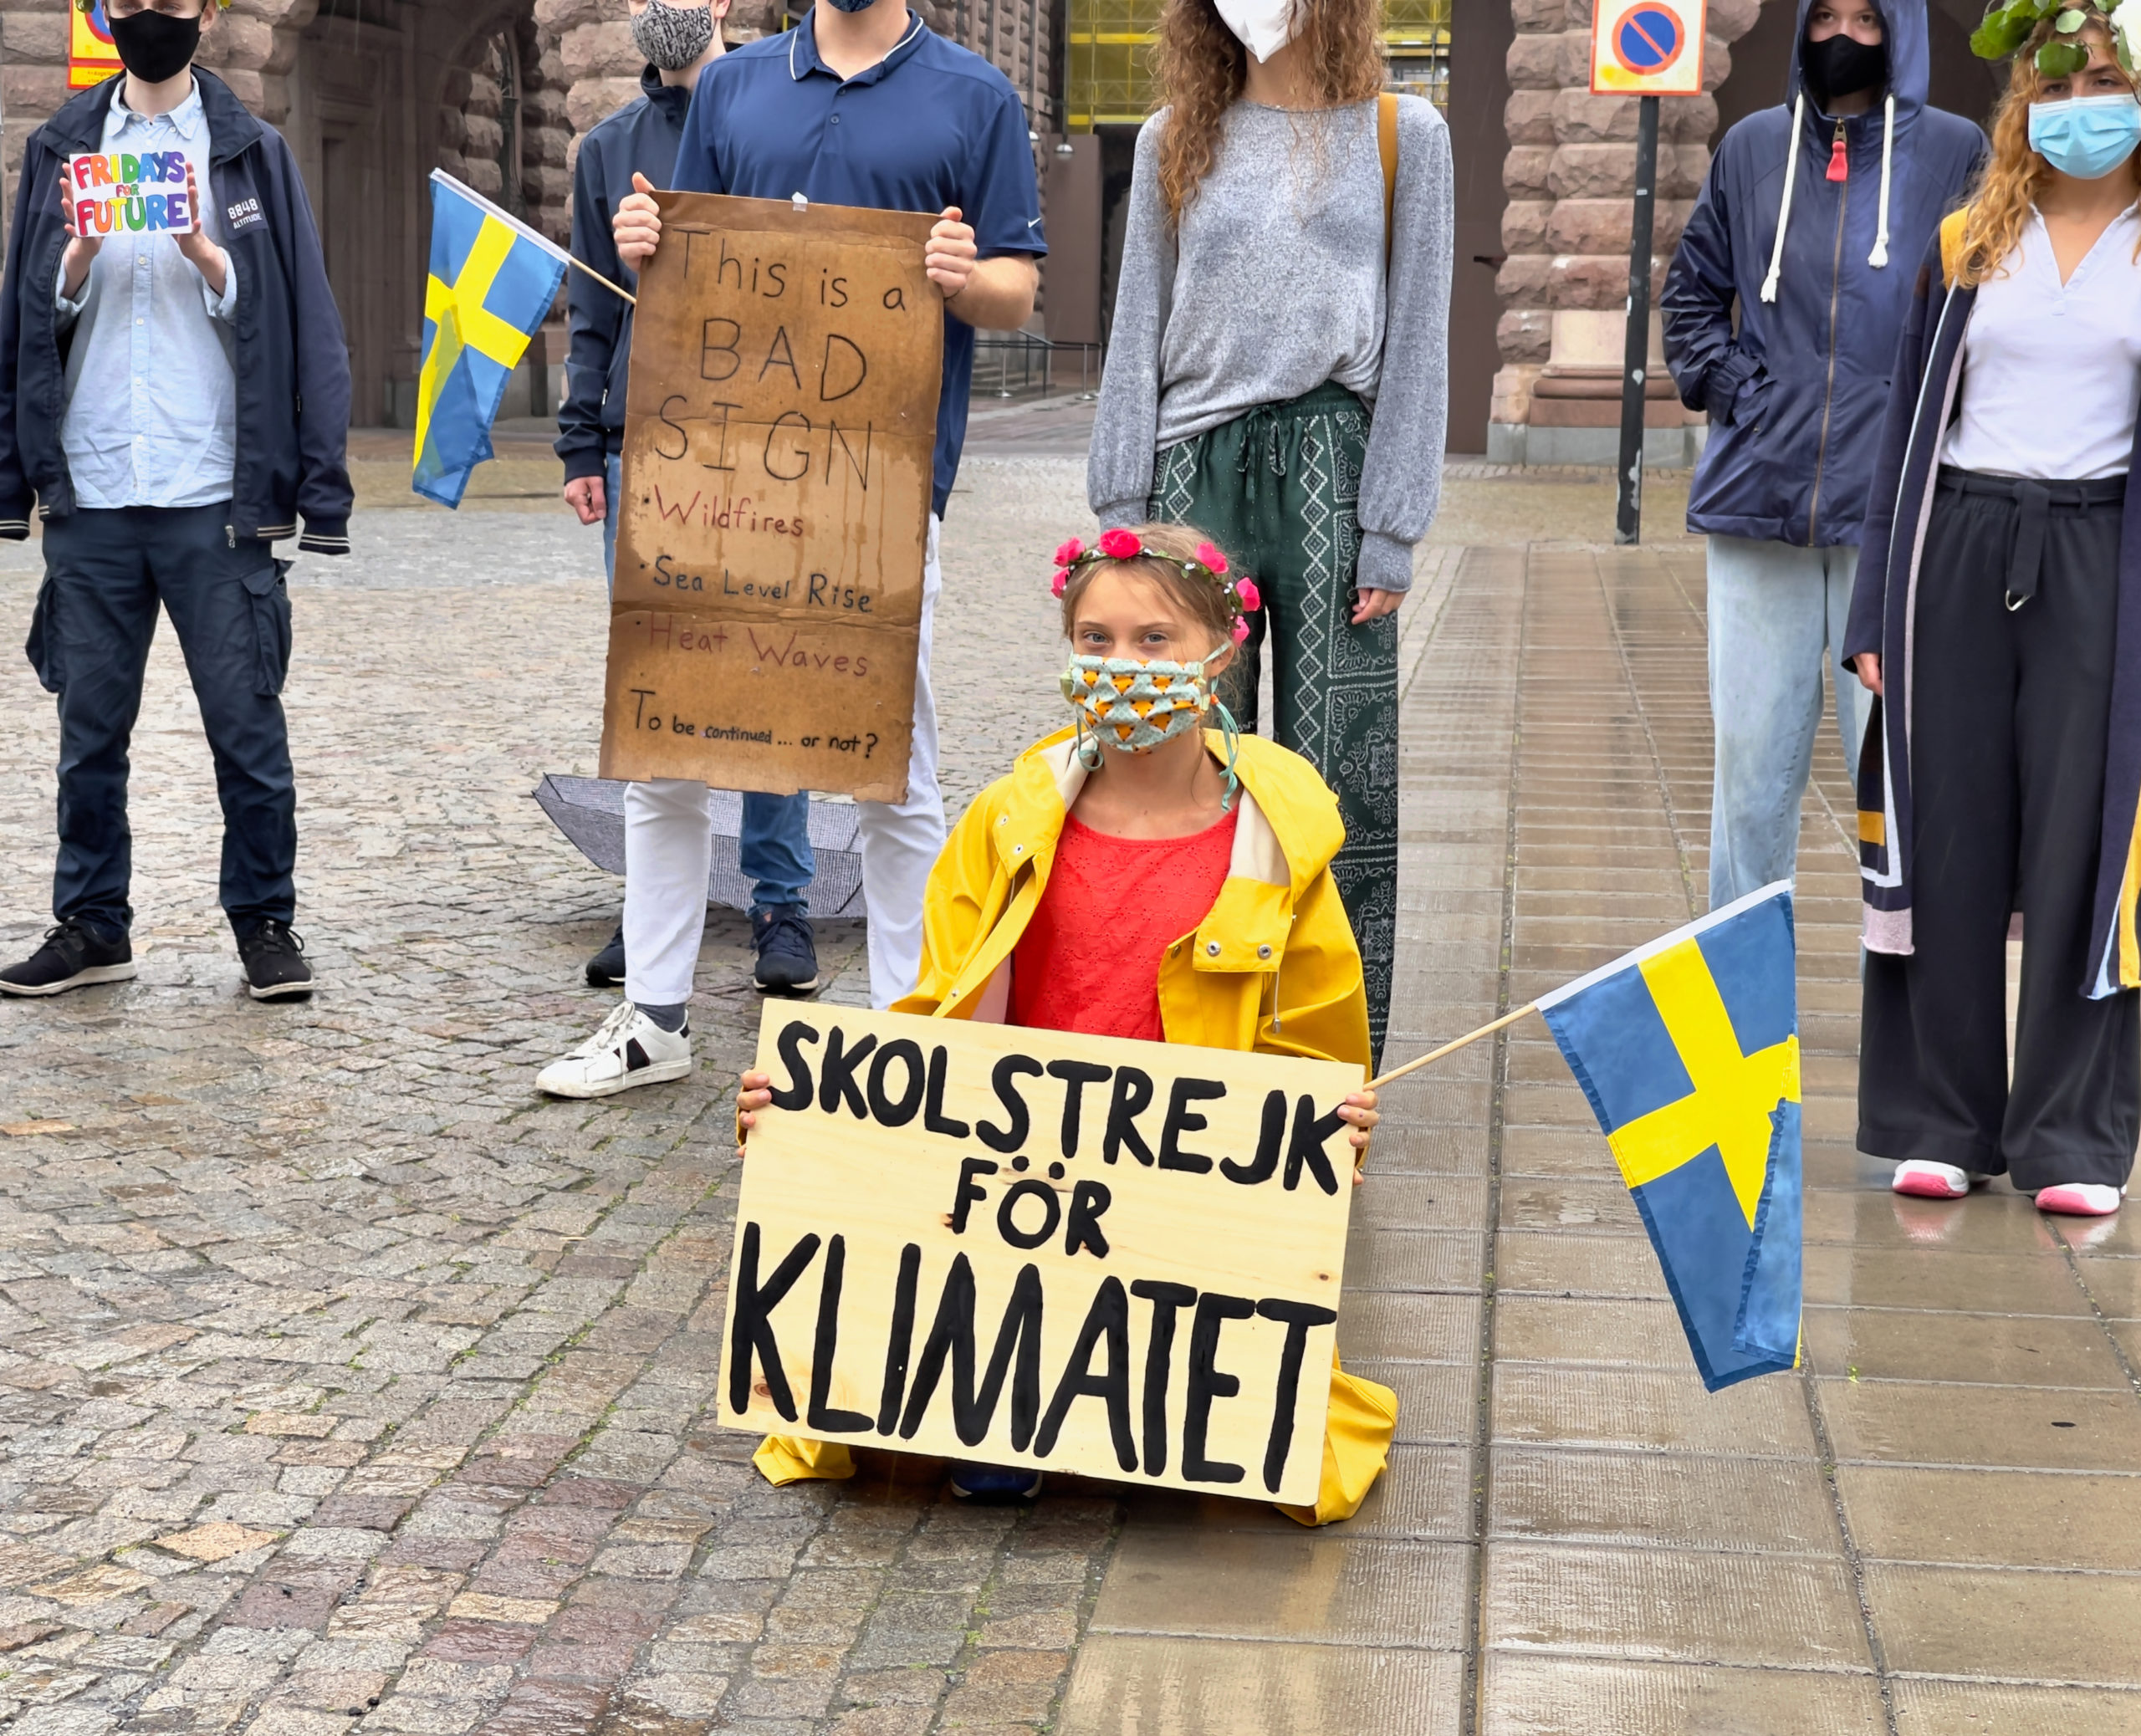 Climate activist Greta Thunberg protests the lack of climate change action from Stockholm